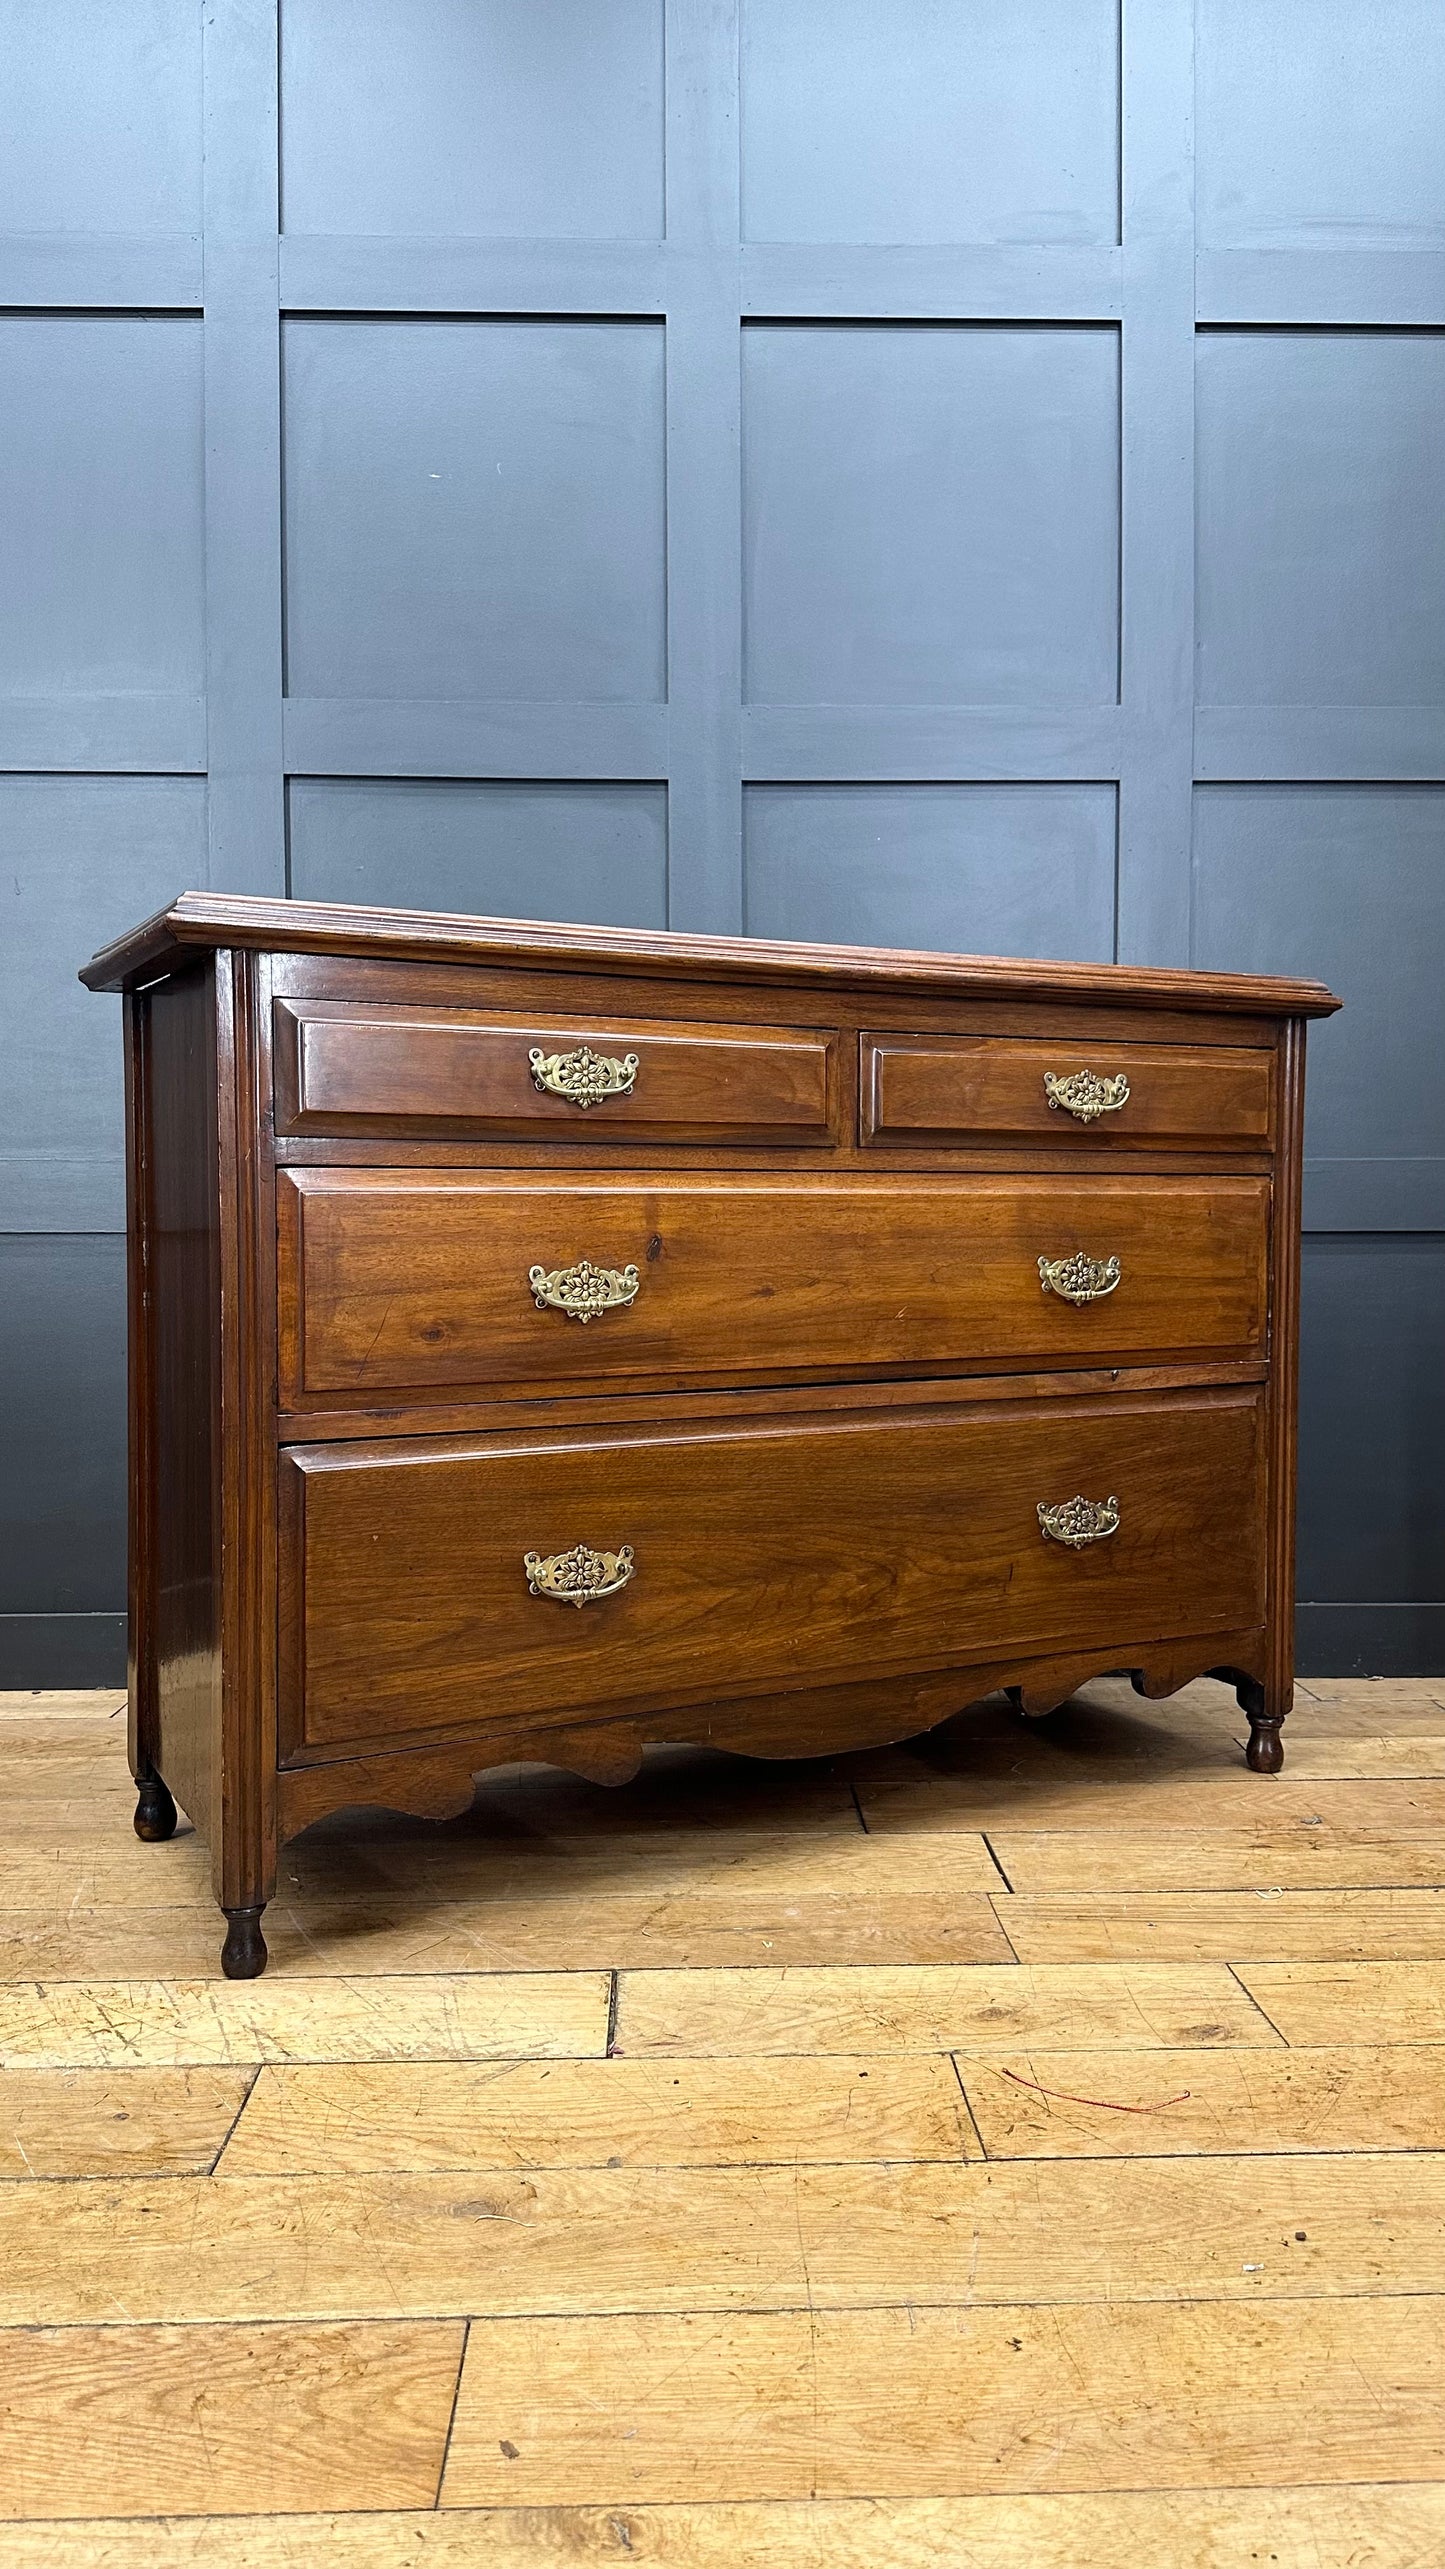 Antique Mahogany Chest Of Drawers / Bedroom Furniture/ Victorian Drawers